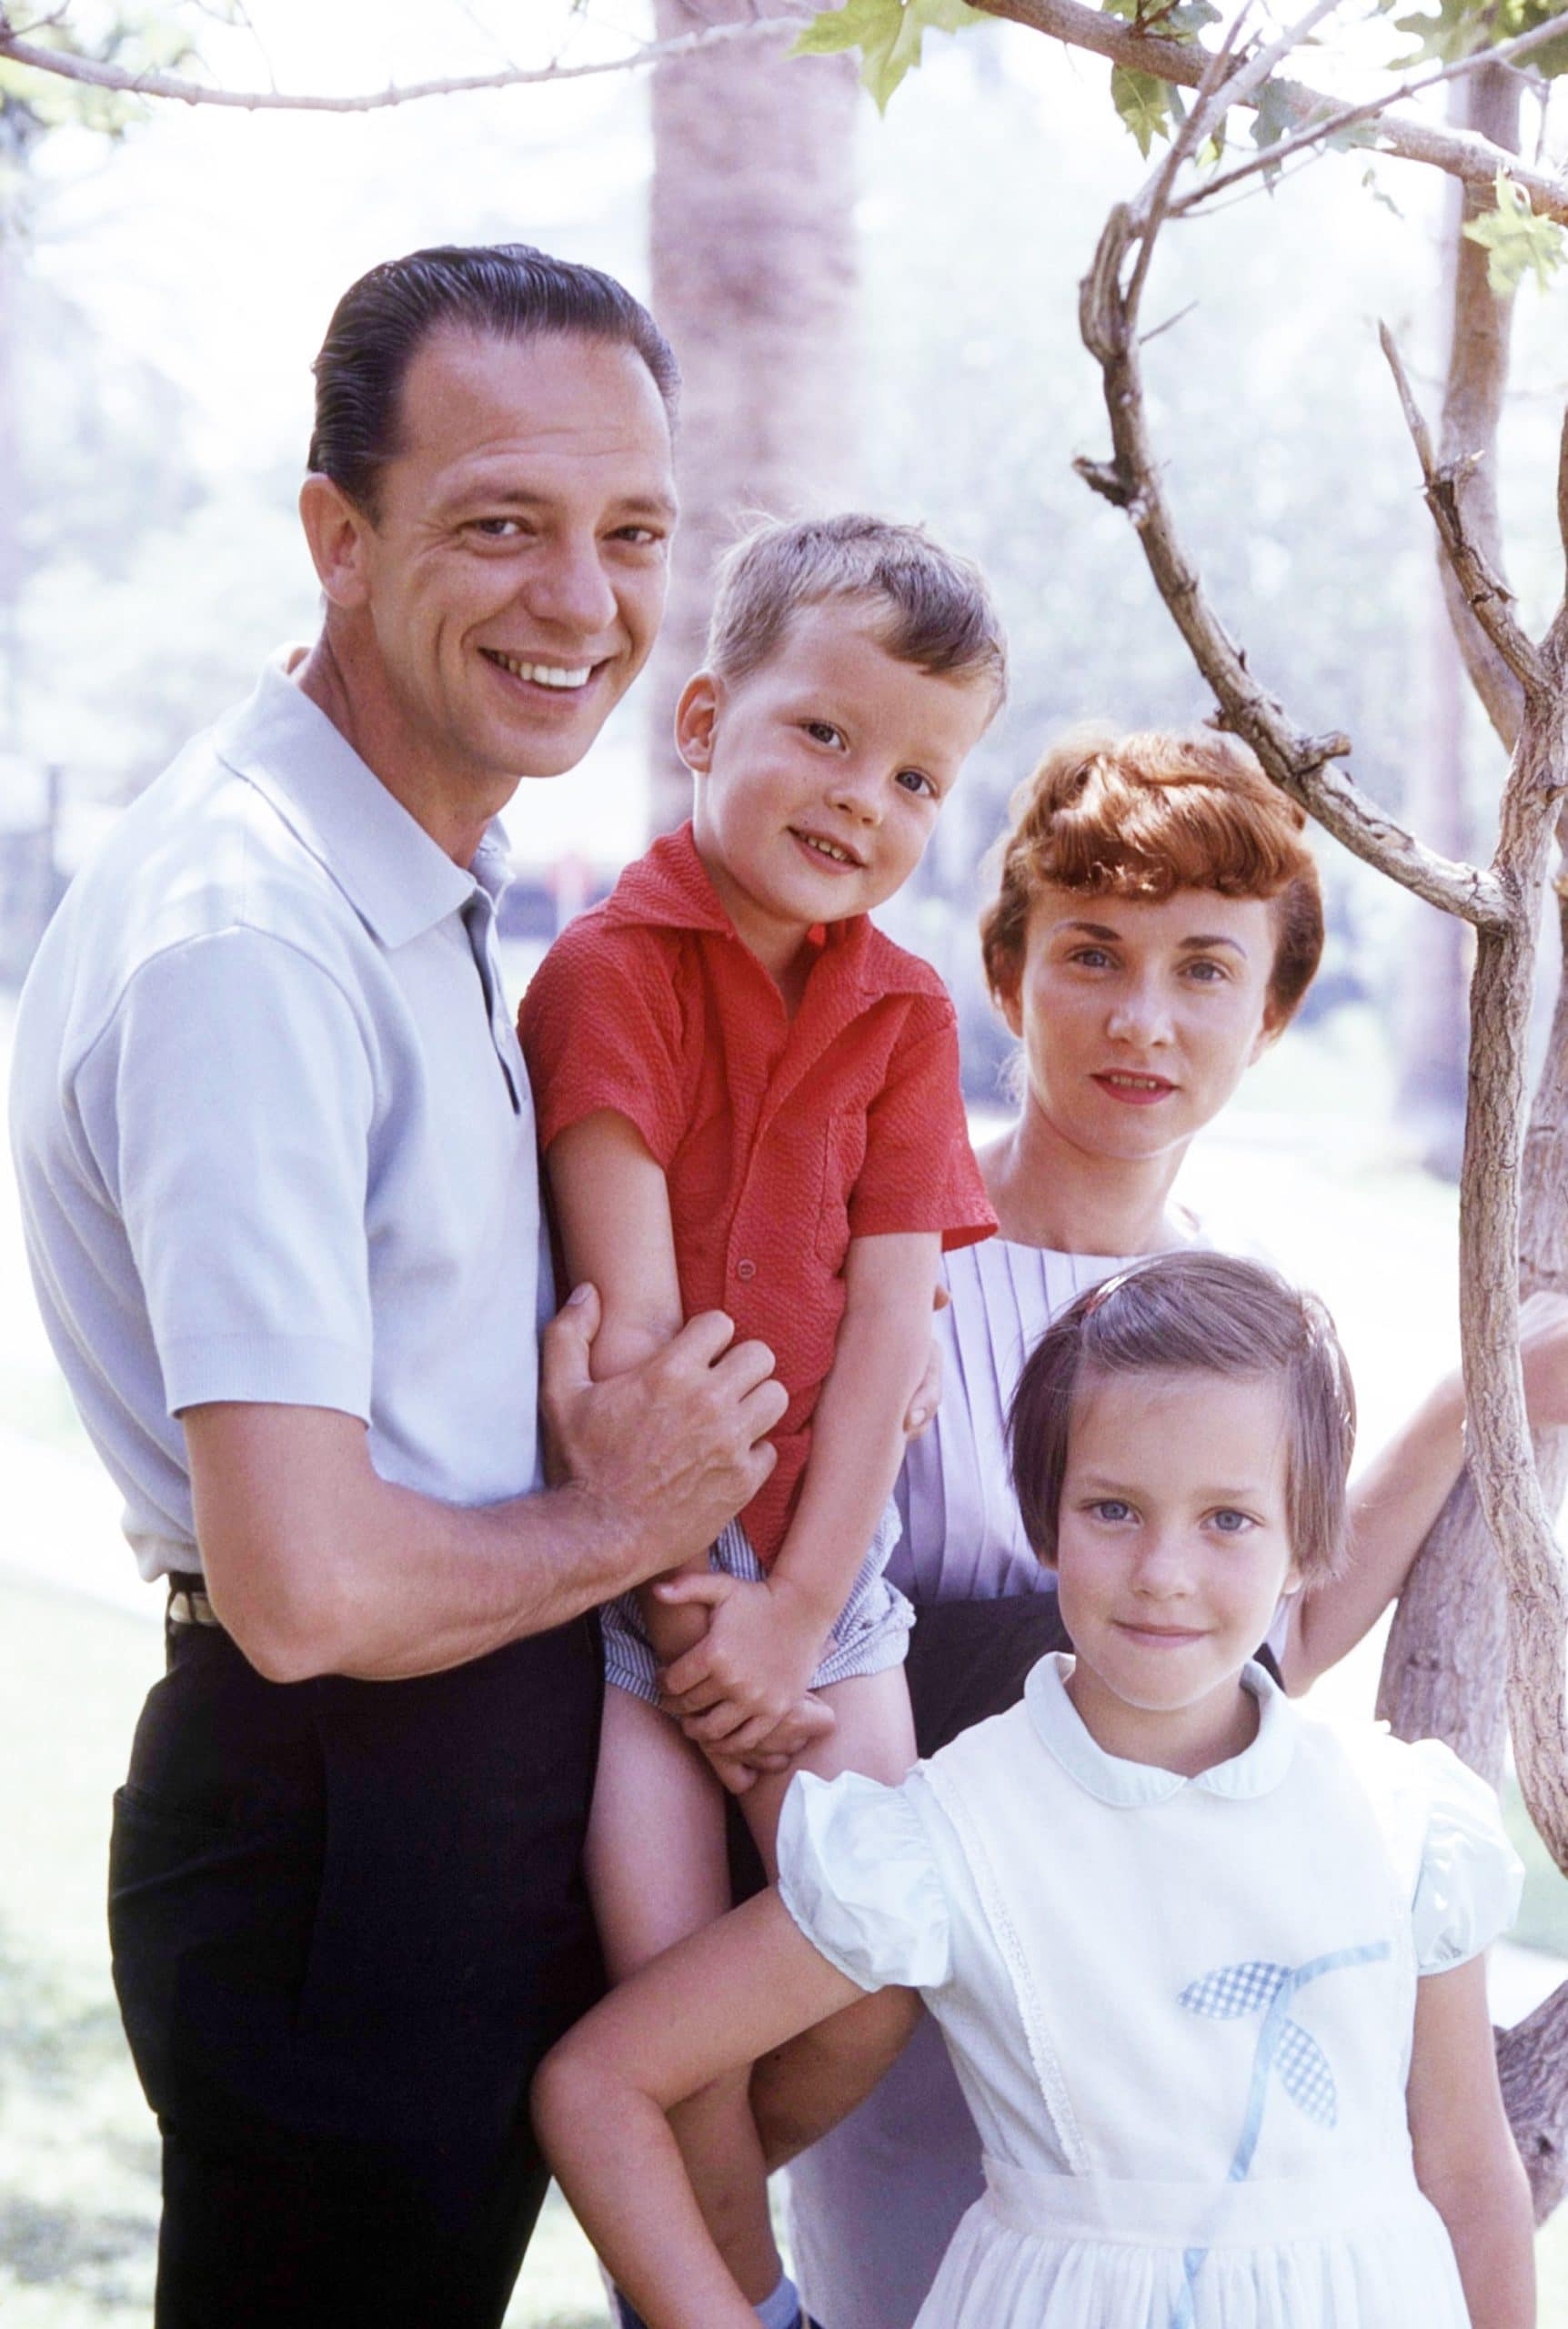 Don Knotts, with his first wife, Kathryn Knotts, and their children, Karen Knotts and Thomas Knotts, ca. early 1960s (photo by Gene Trindl)